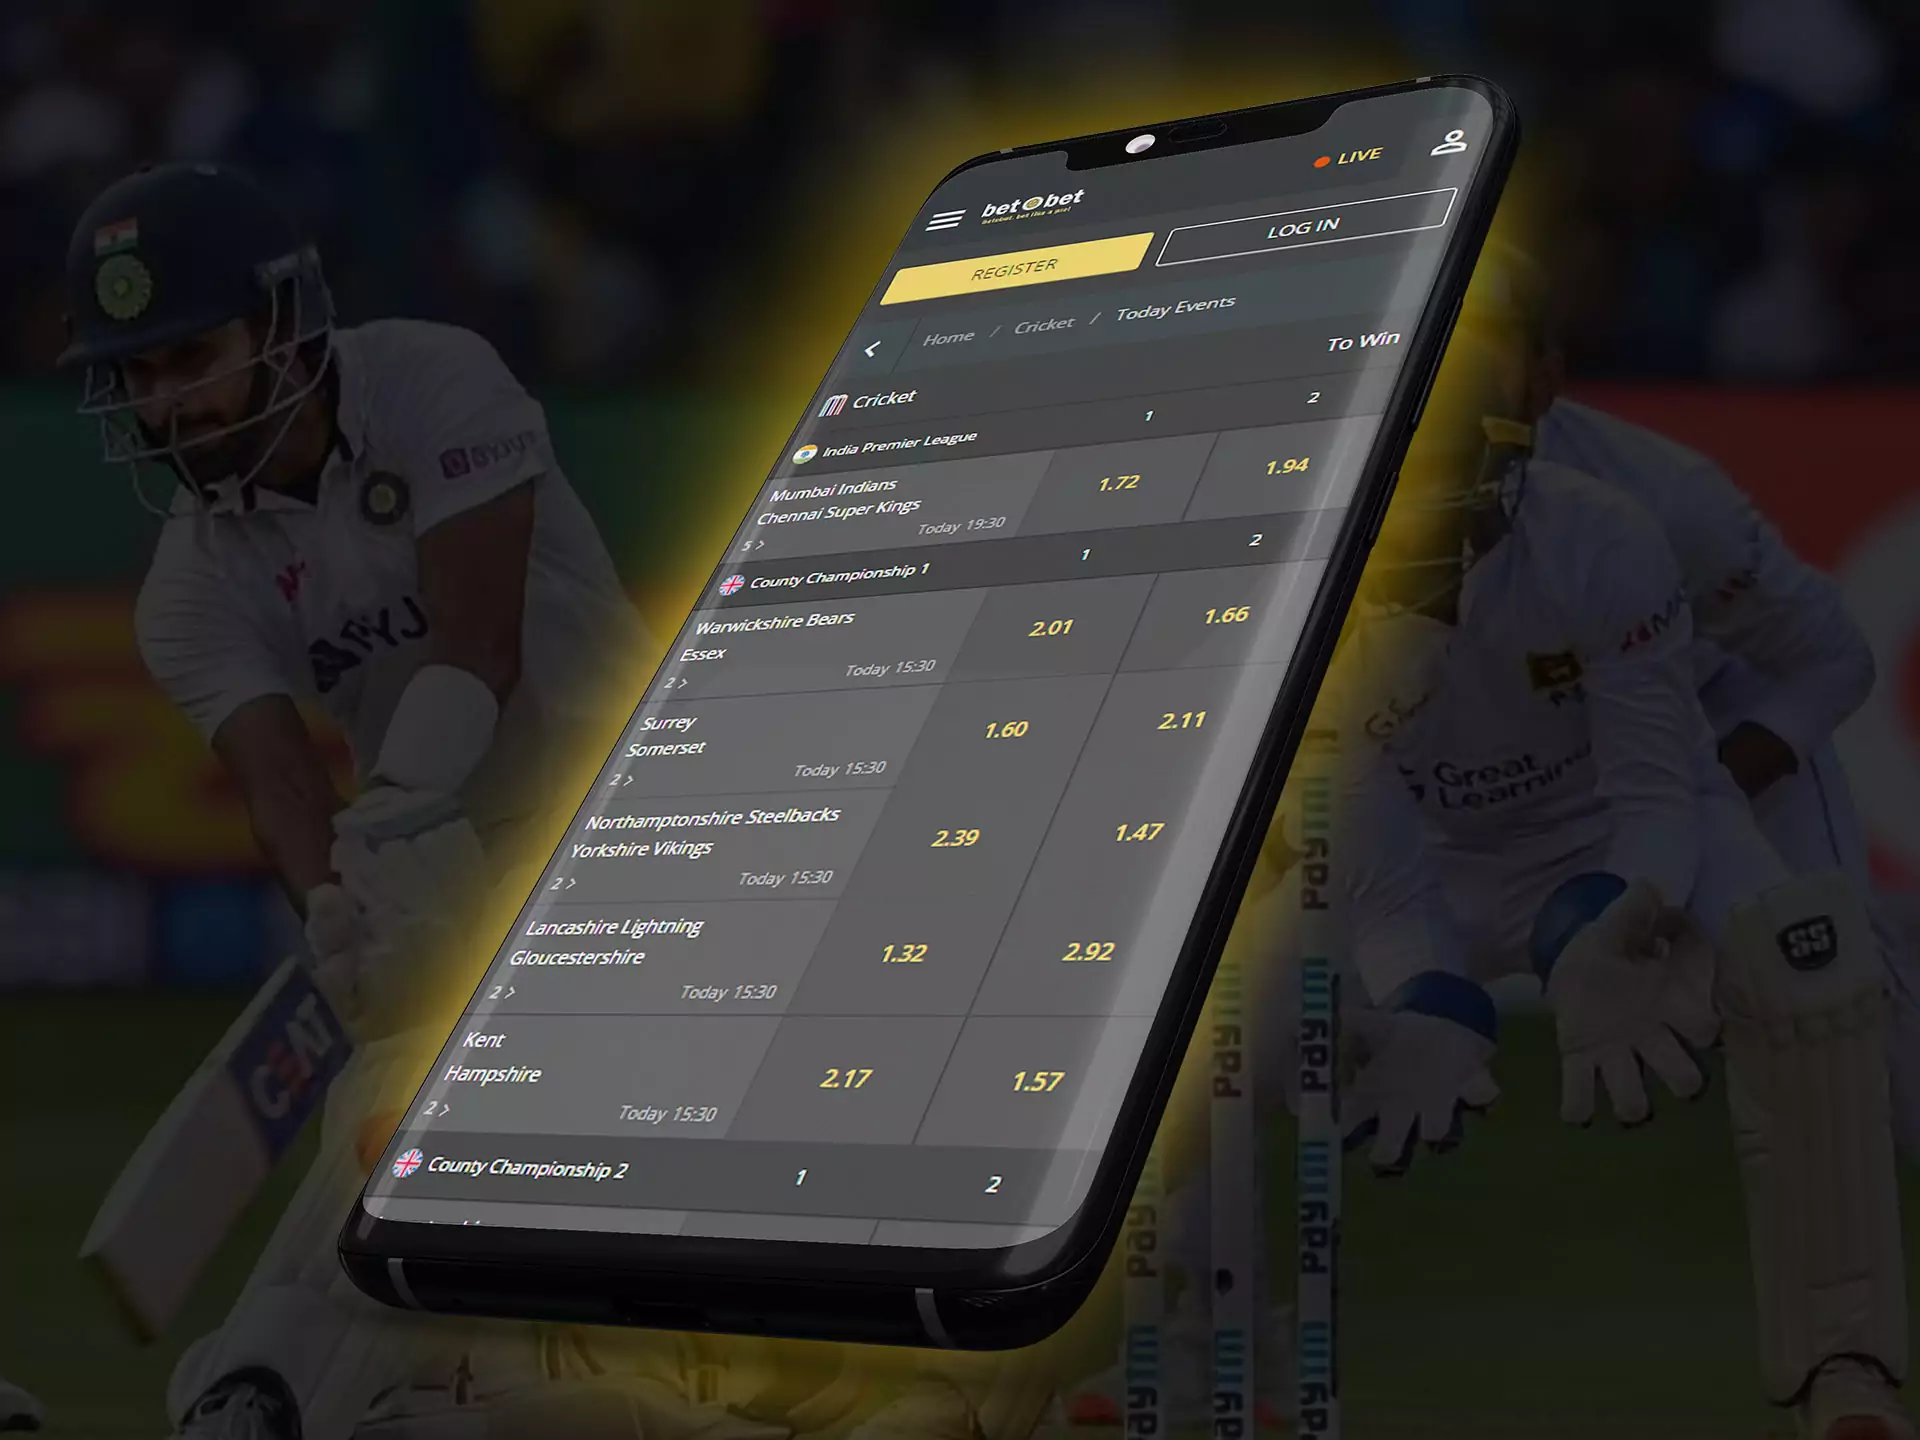 In the mobile version of Bet O Bet users can bet on cricket.